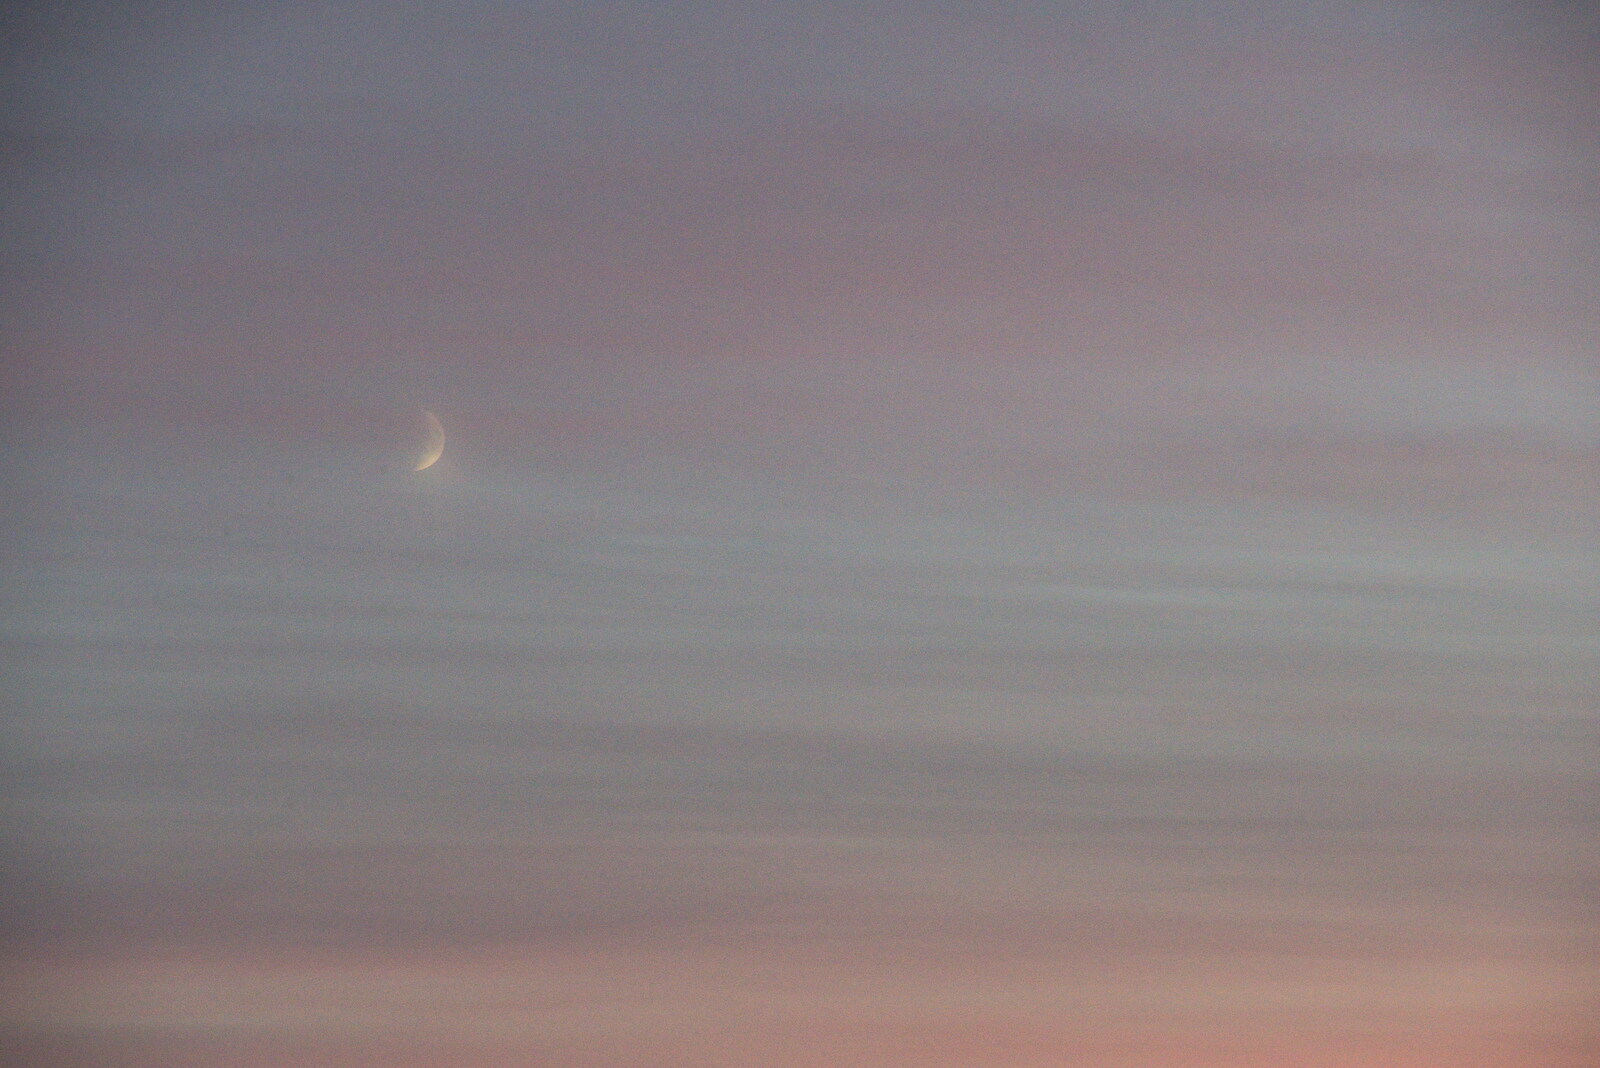 A hazy crescent moon in a pink and blue sky from Sunday Lunch at the Village Hall, Brome, Suffolk - 10th October 2021